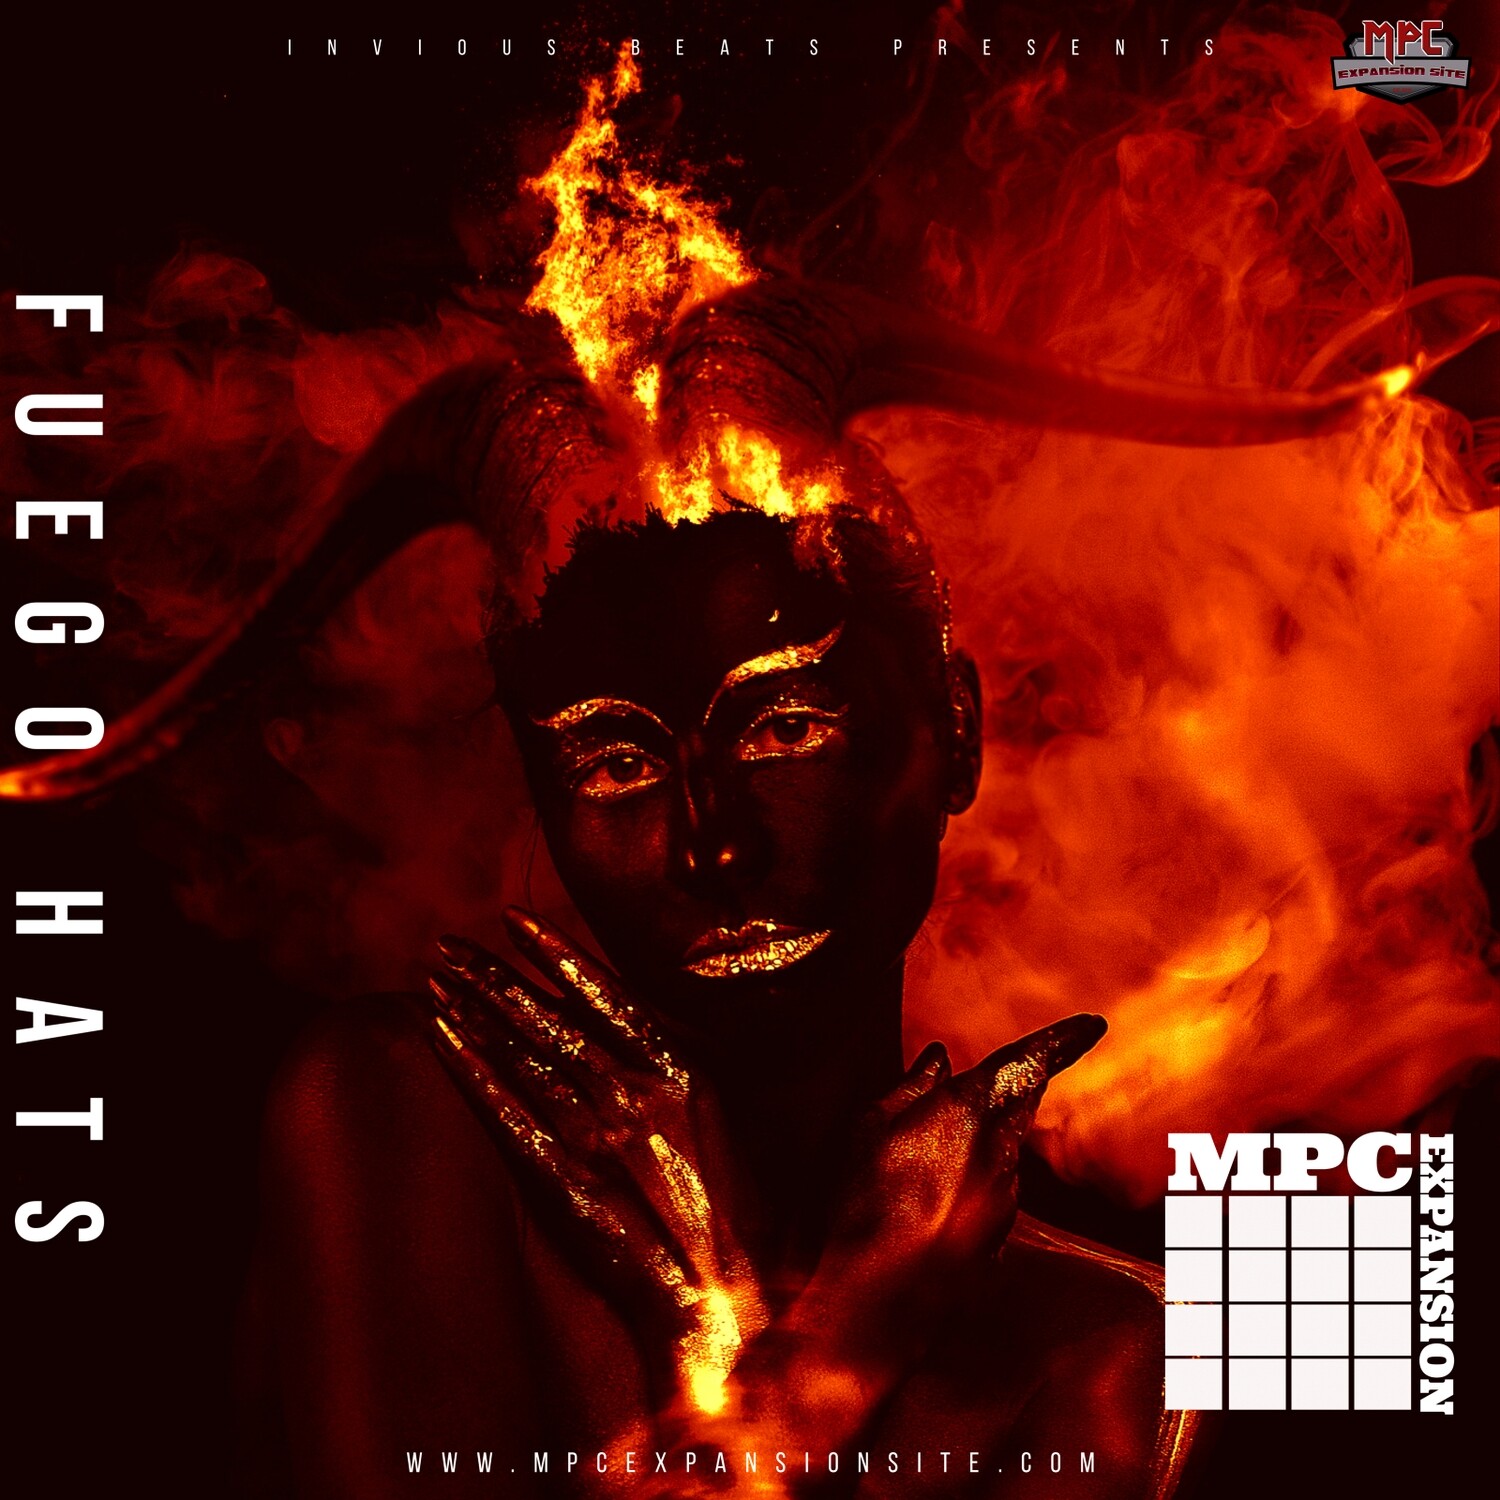 MPC EXPANSION 'FUEGO HATS' by INVIOUS BEATS